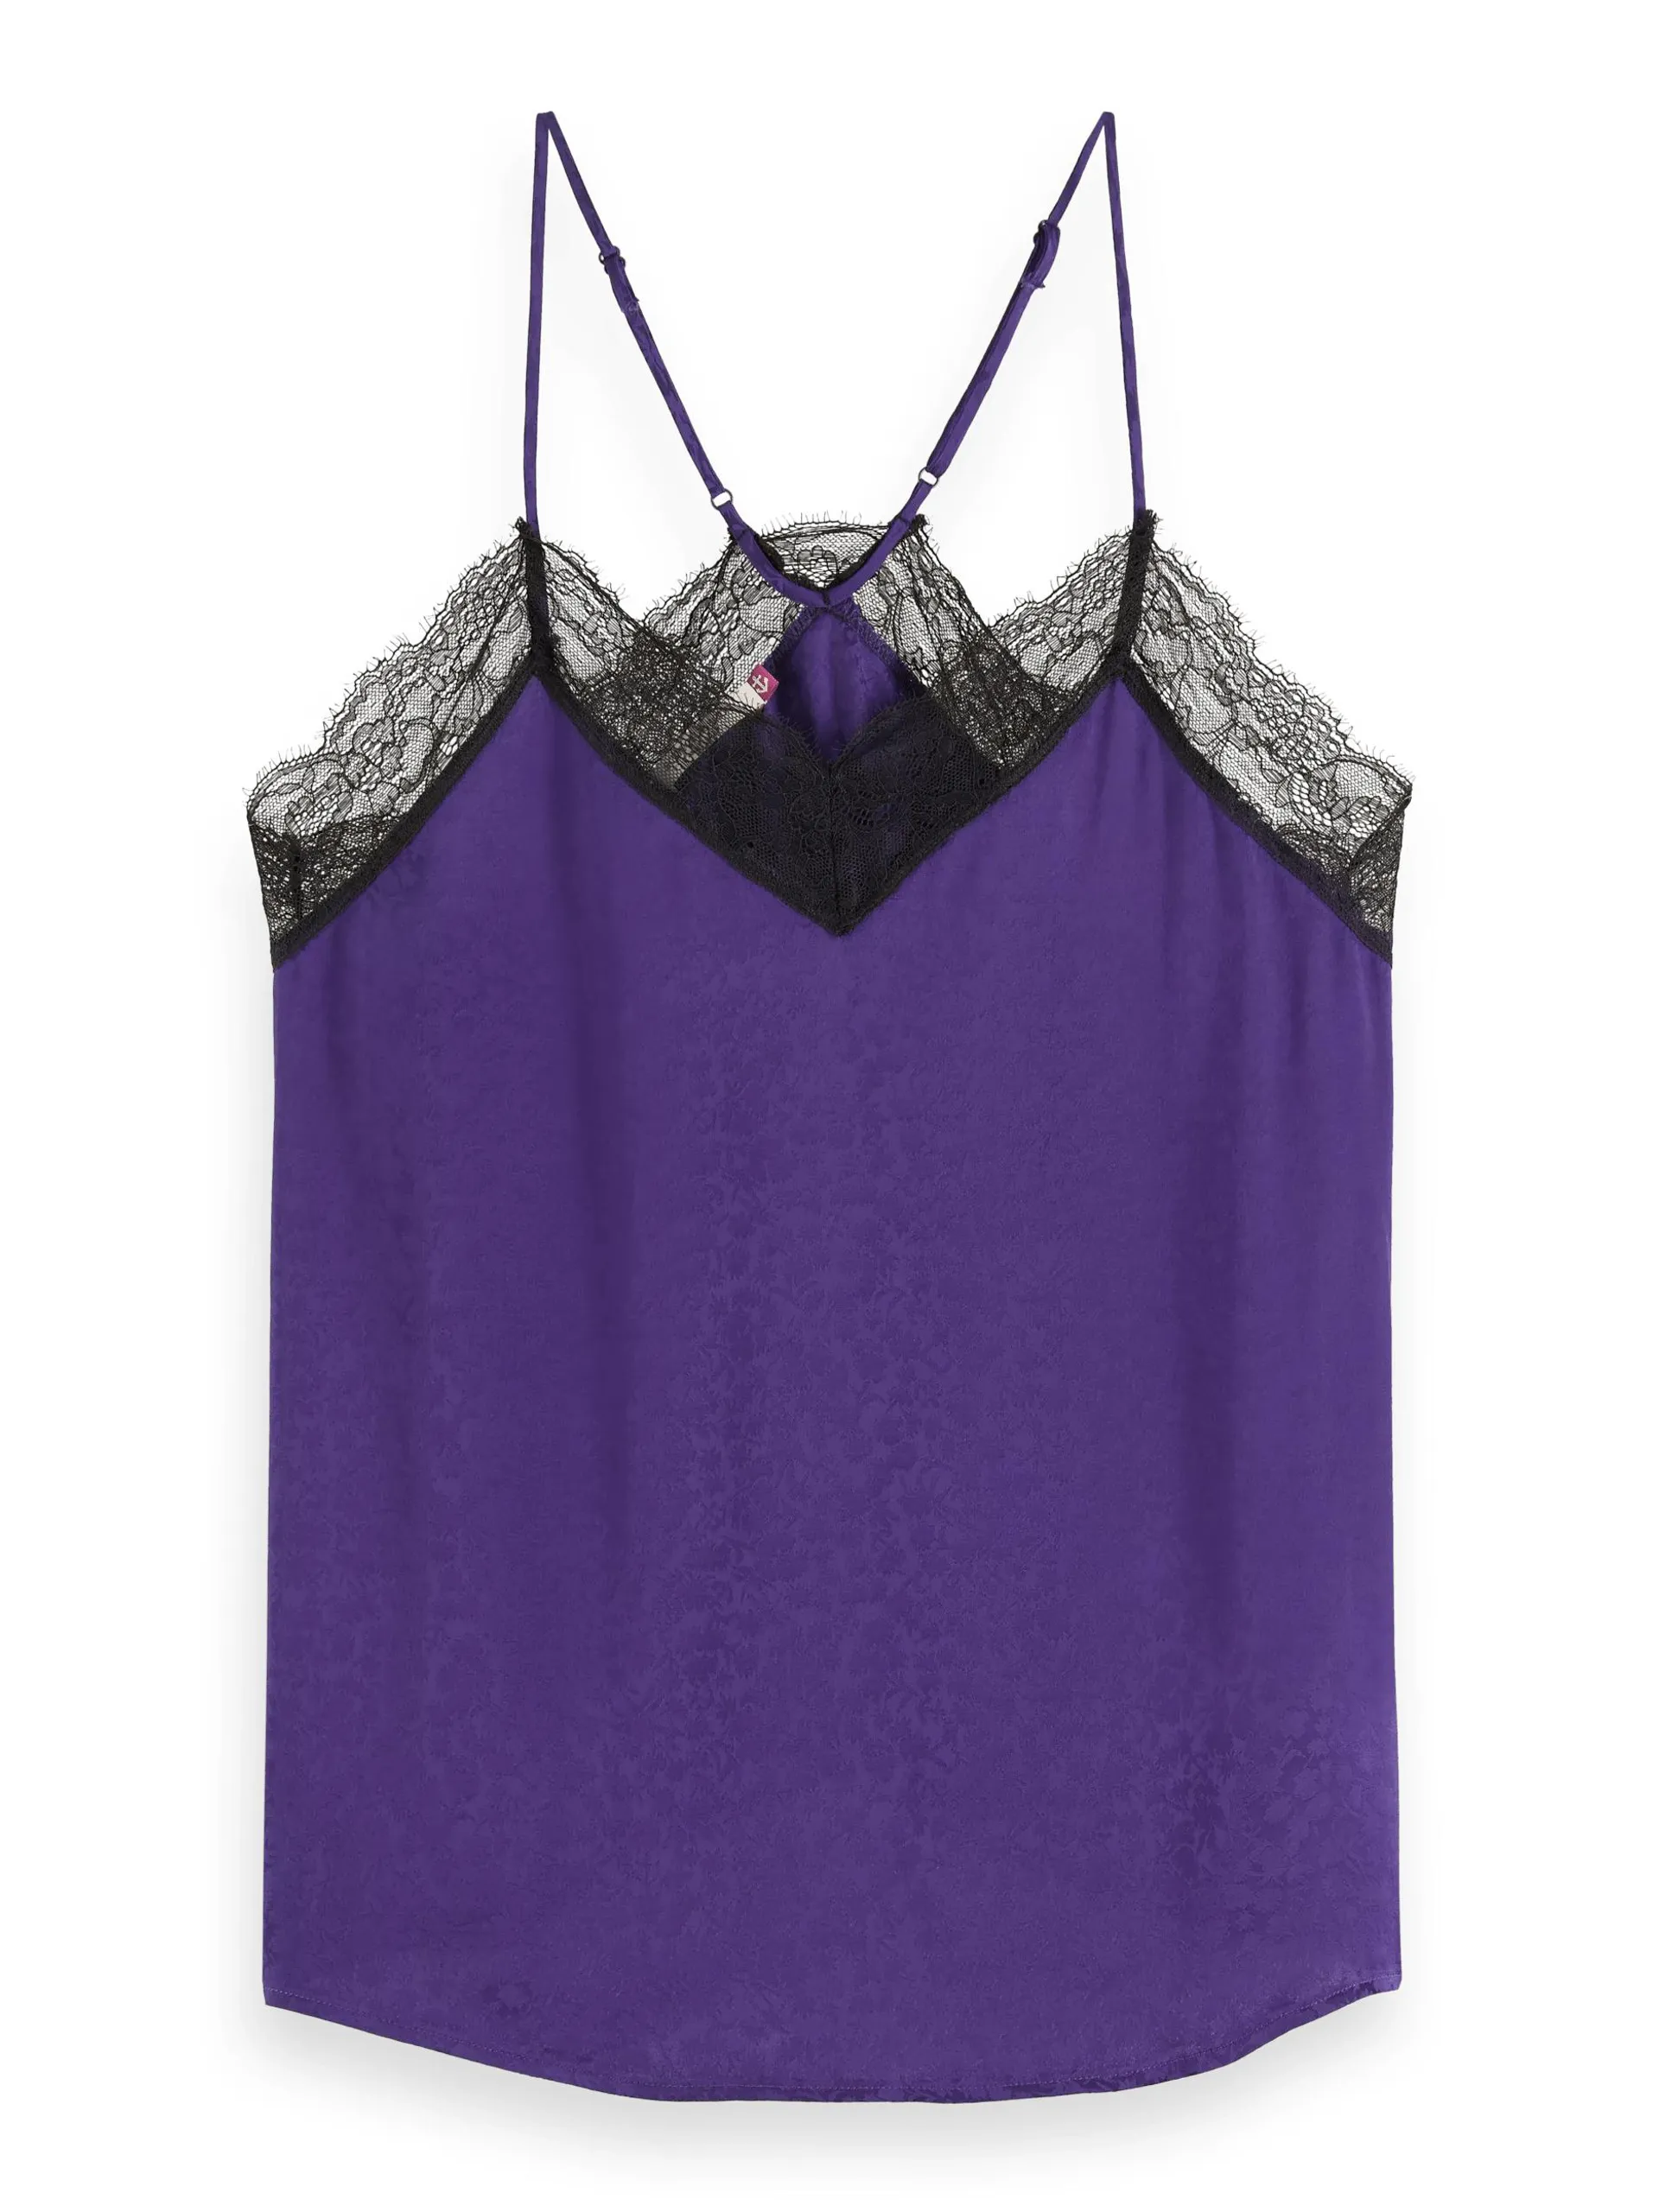 Camisole with black lace trim